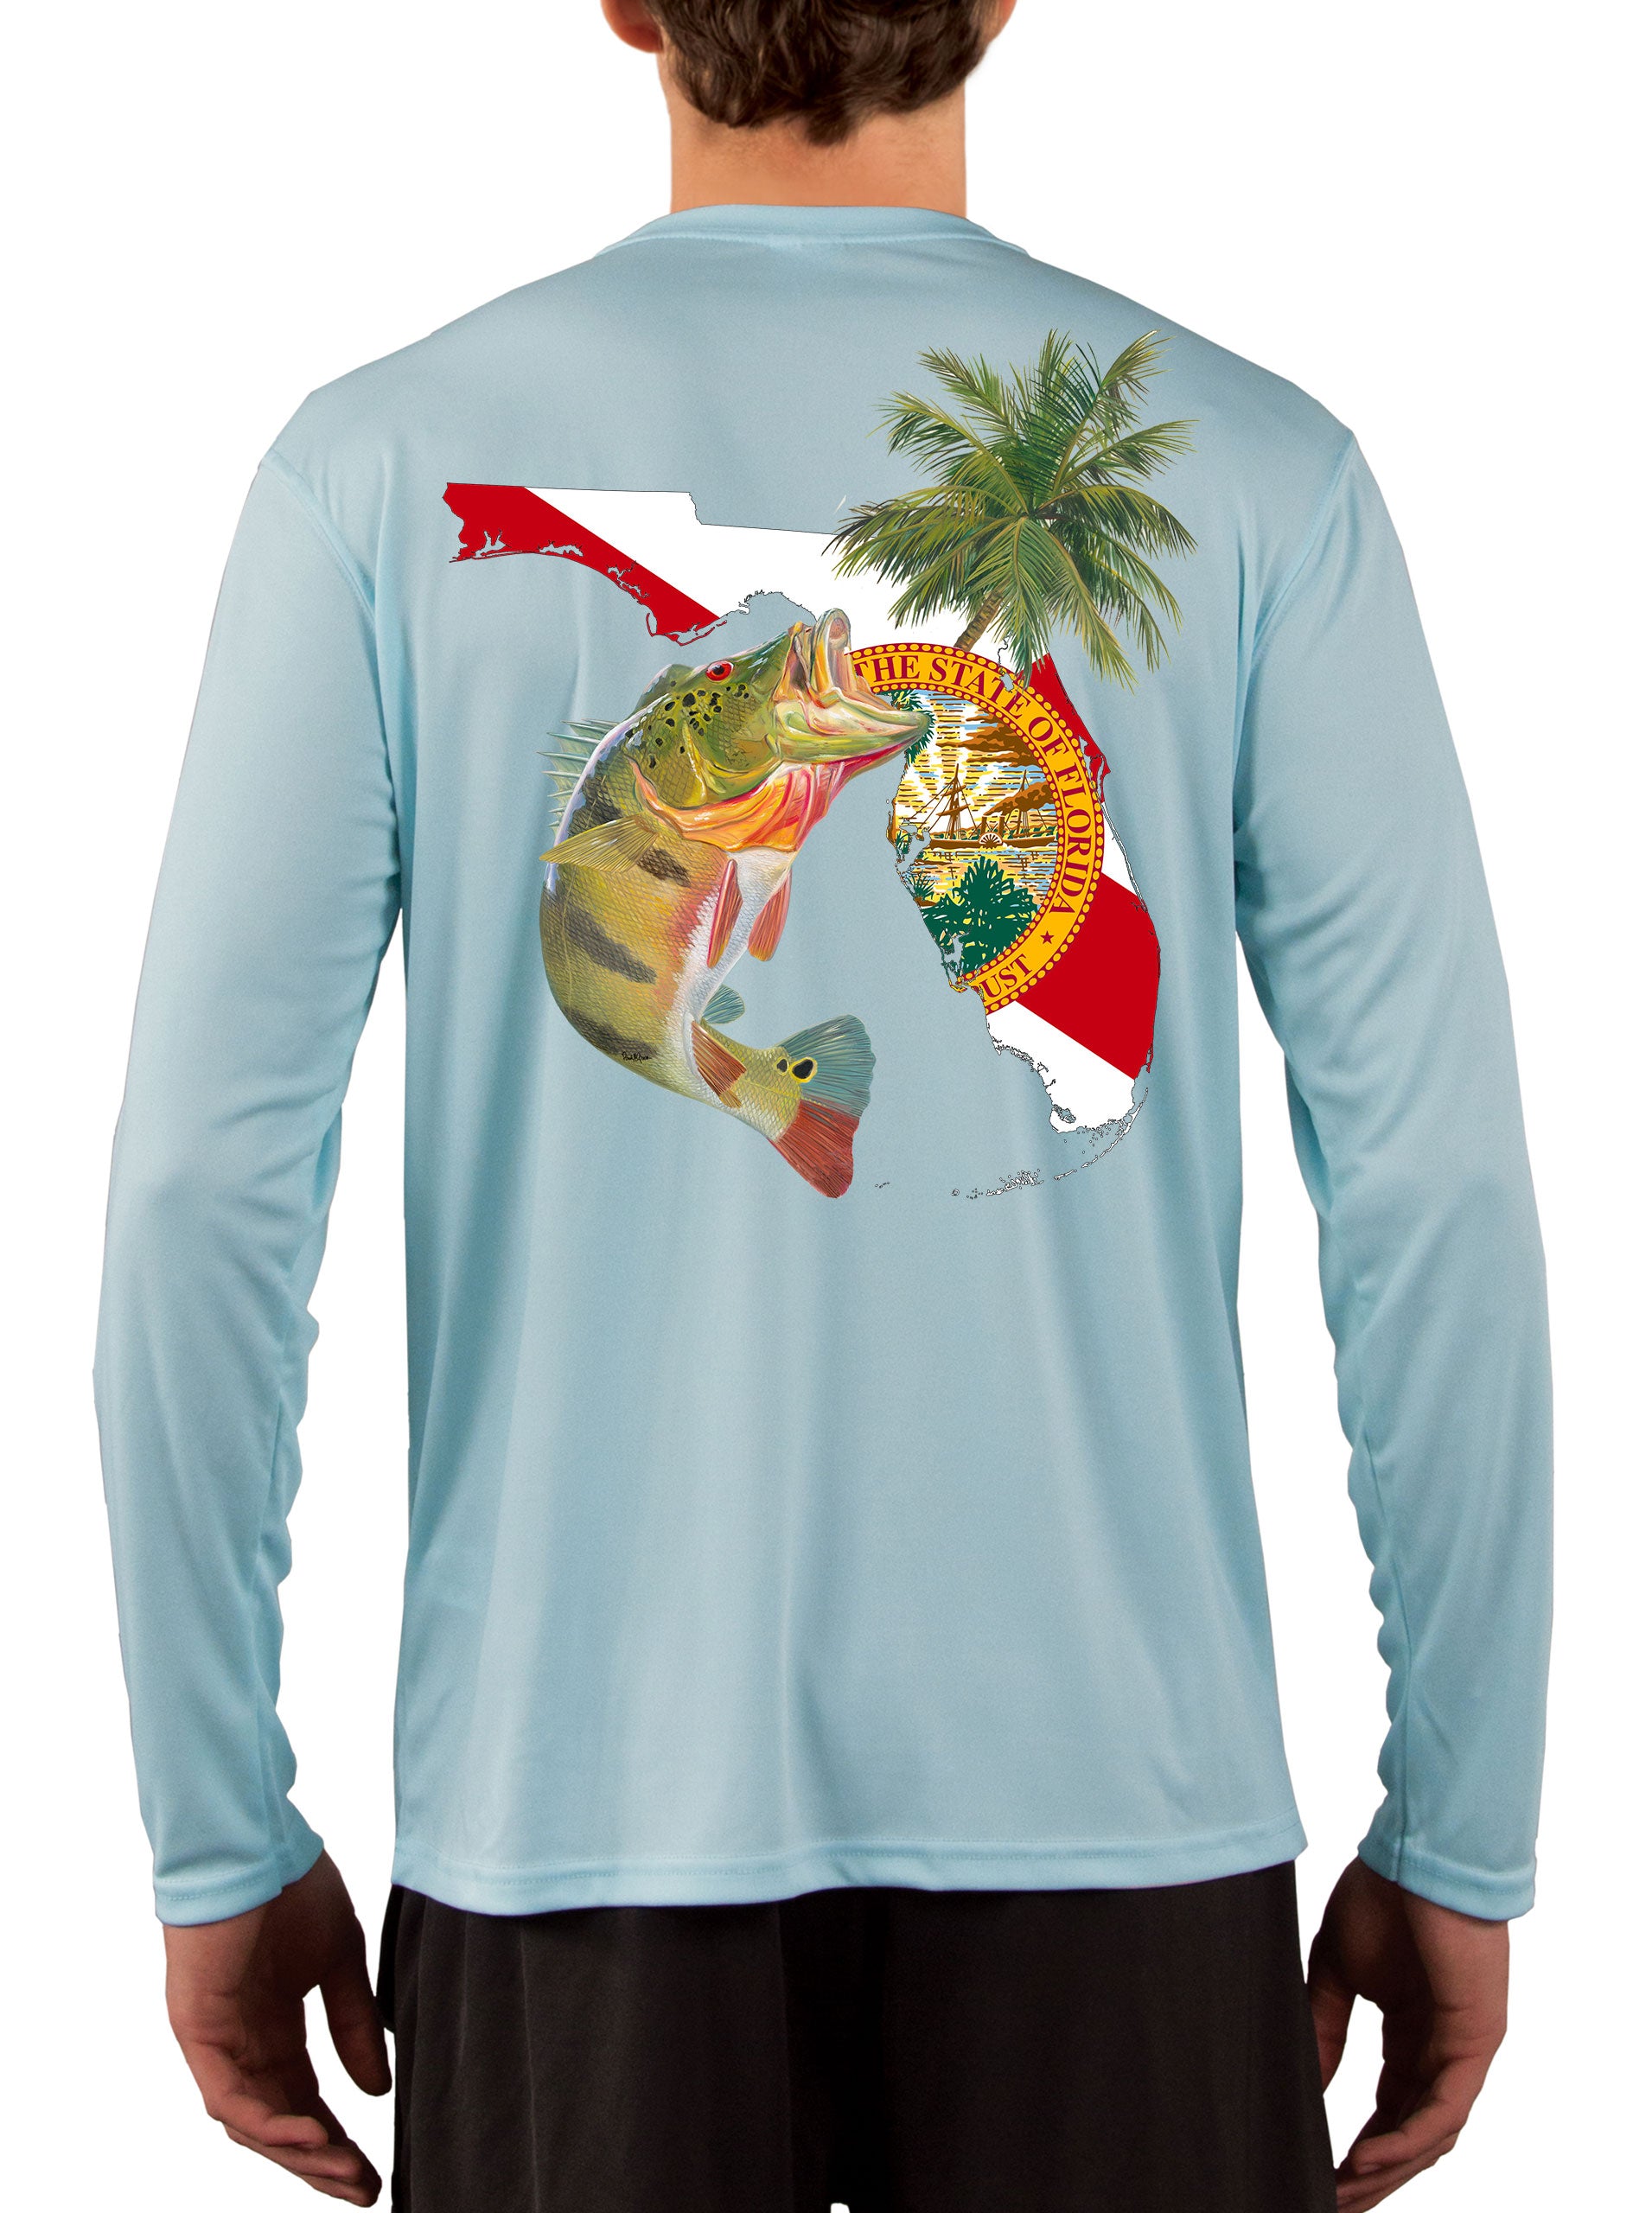 [New Artwork] Peacock Bass Florida Map Fishing Shirts for Men with Florida State Flag Sleeve Large / Ice Blue